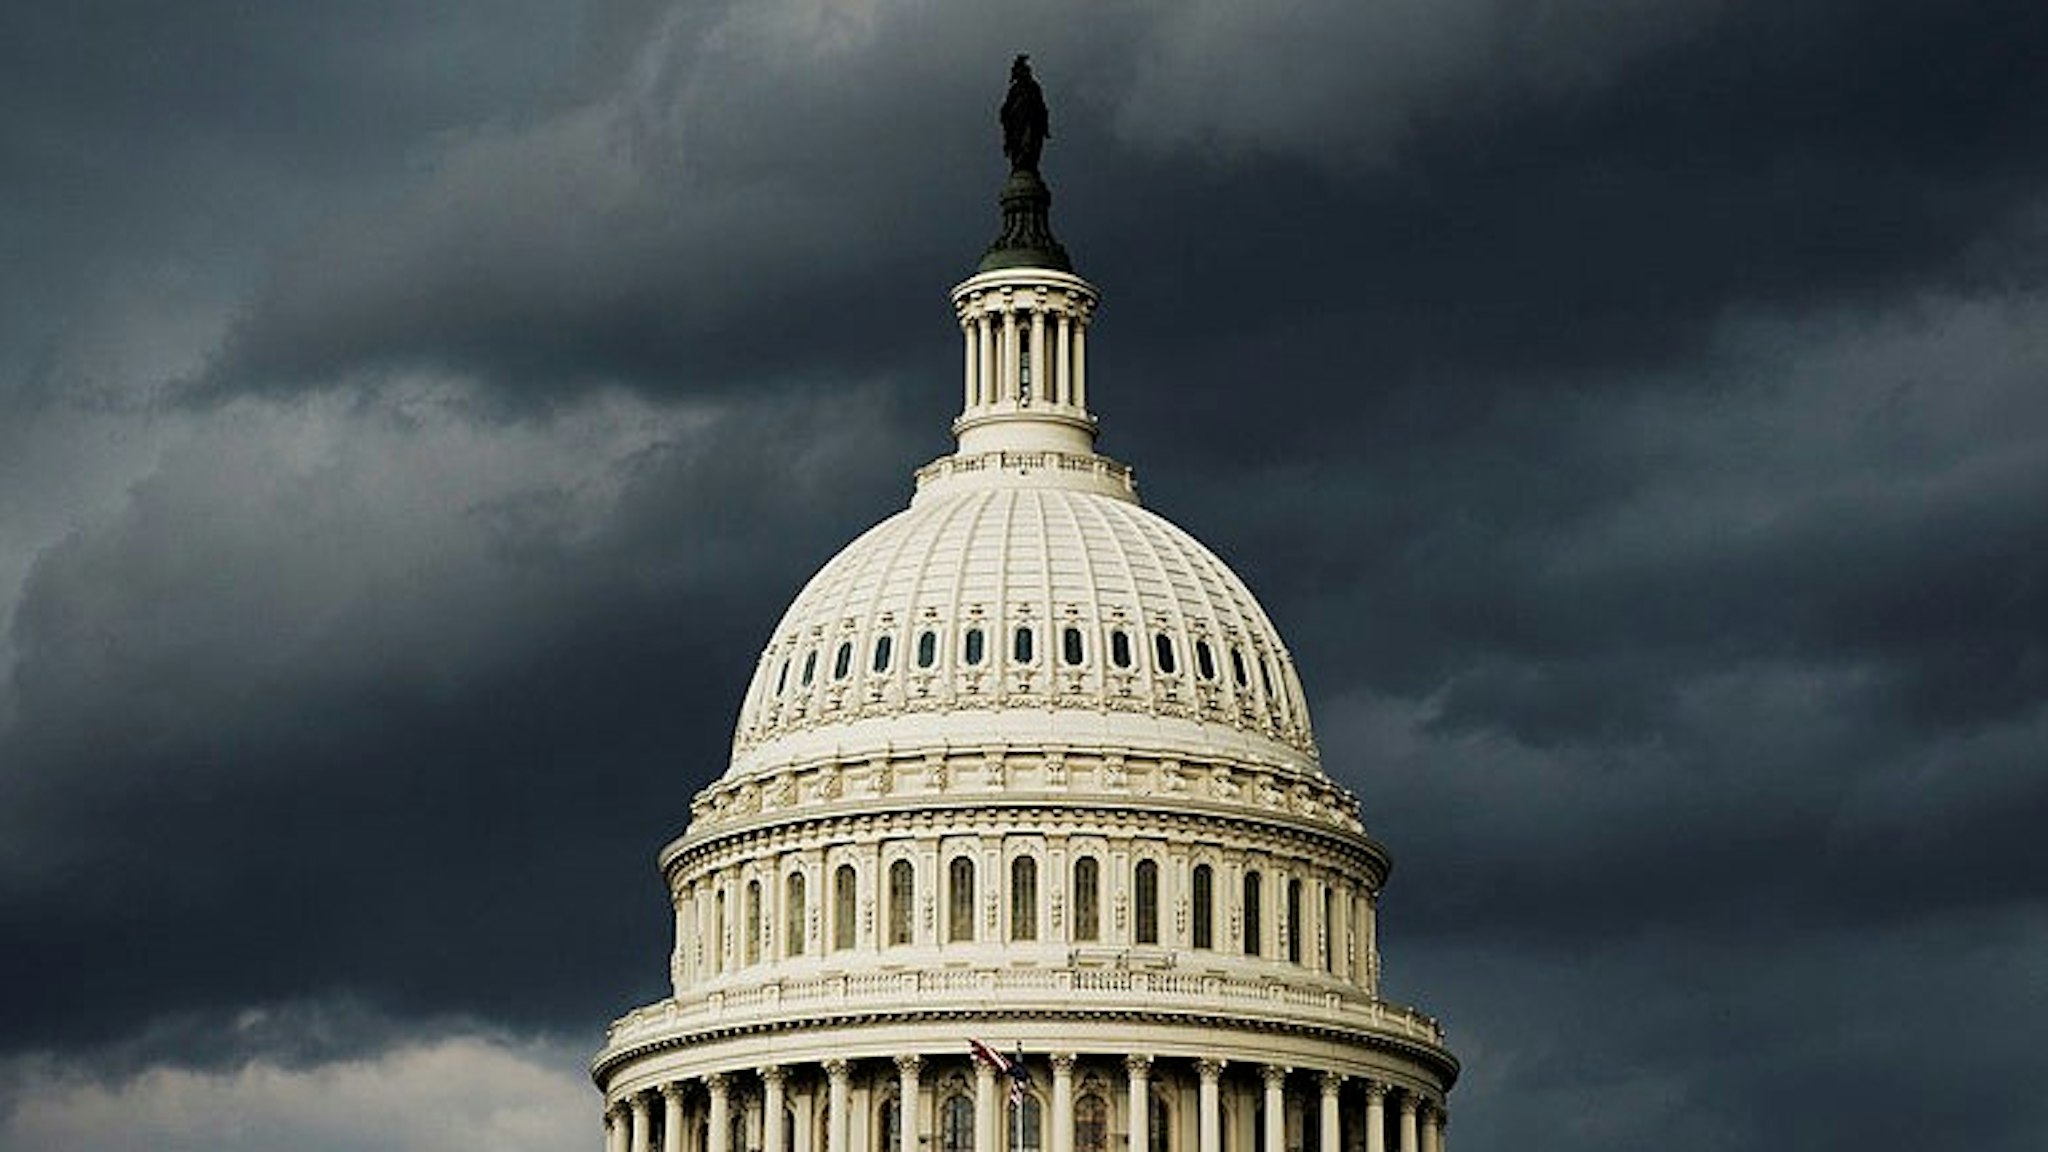 A strong storm front passes over the U.S. Capitol on Tuesday, July 8, 2014.